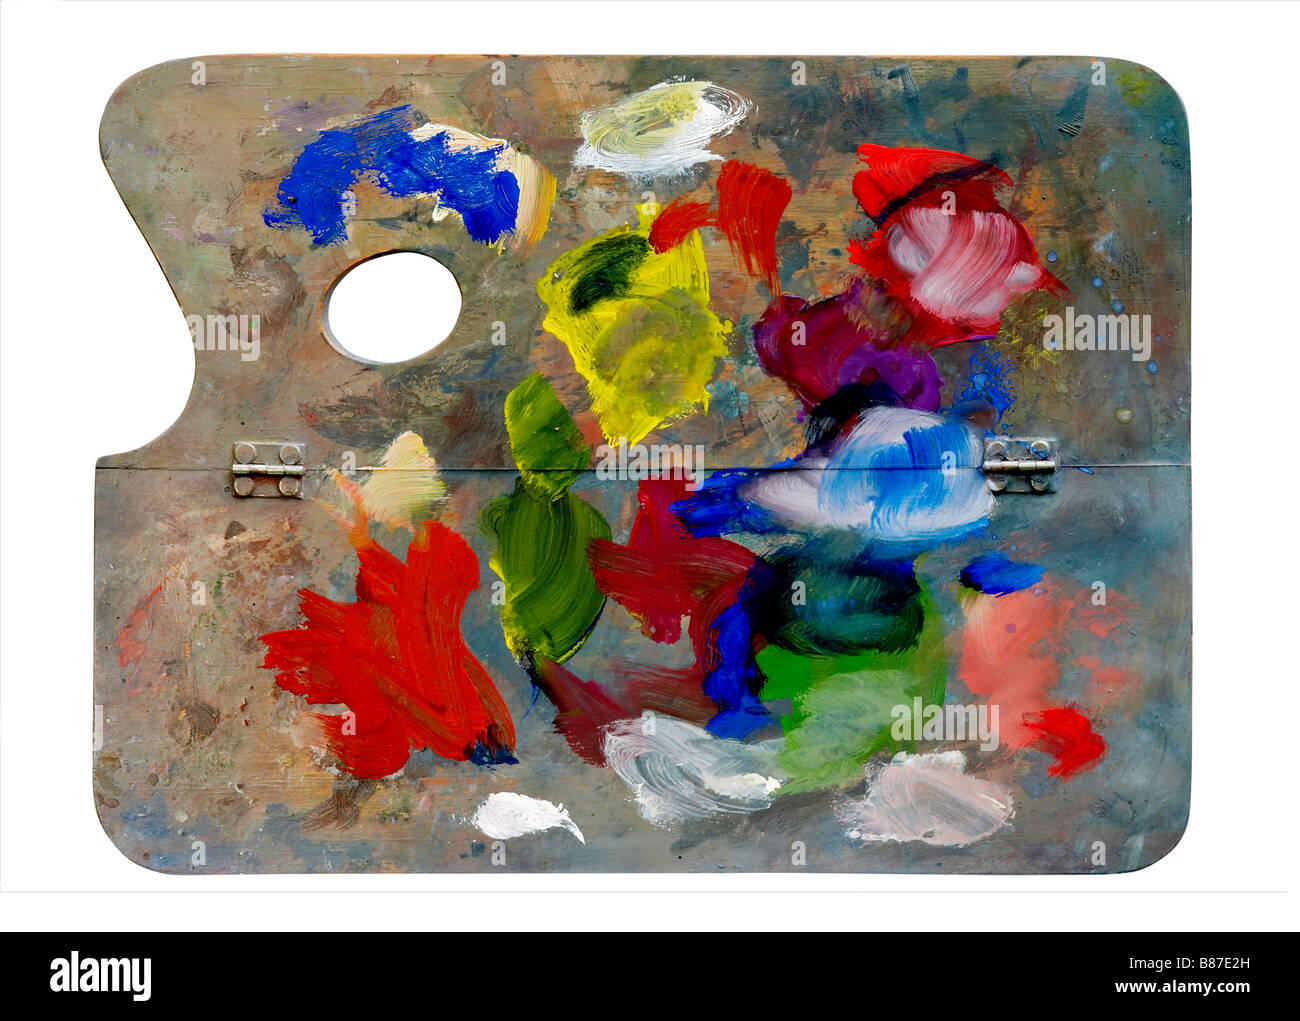 Detail of the used artistic palette Stock Photo